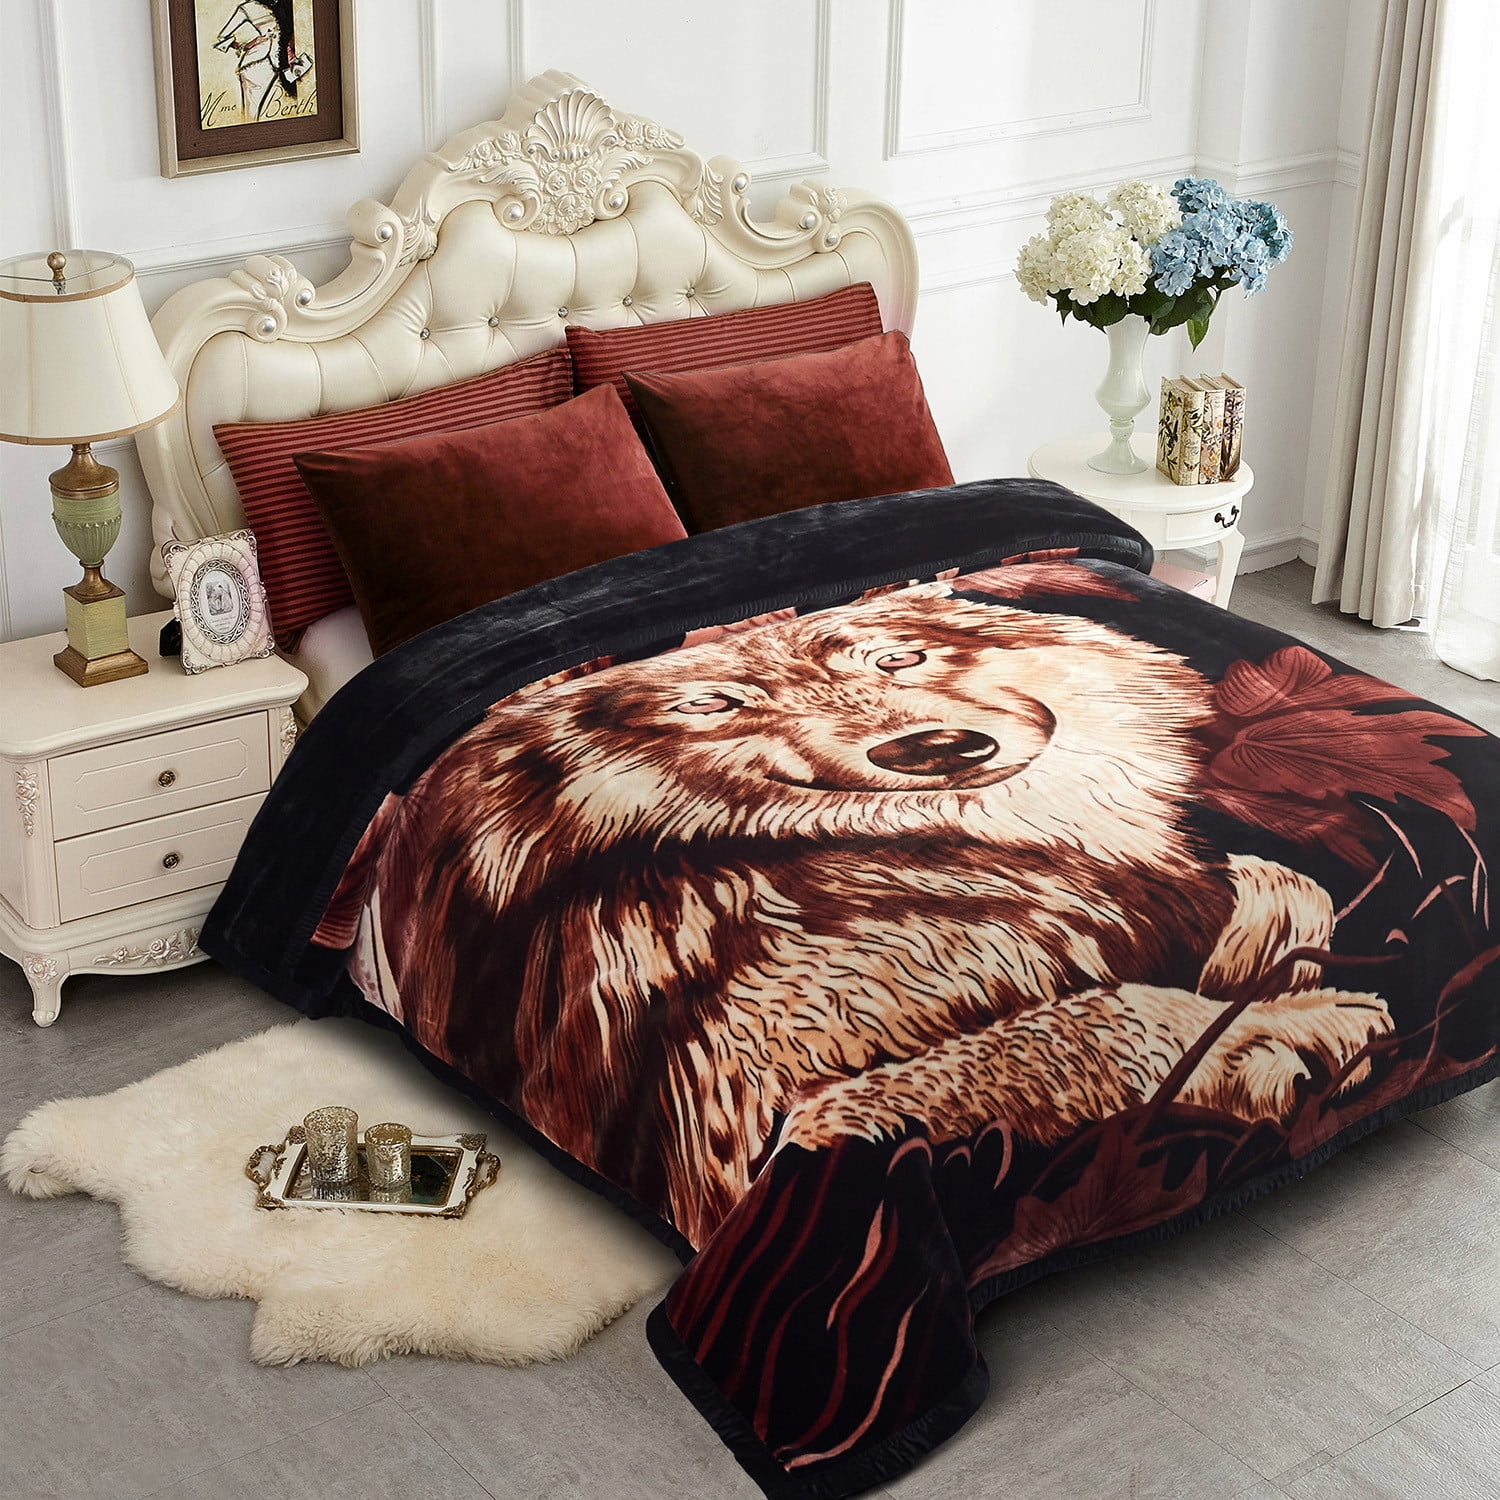 NC King Size Mink Fleece Blanket For Bed,Wolf Pattern 2 Ply Heavy Thick  Warm Blanket 10Lbs,85x95 